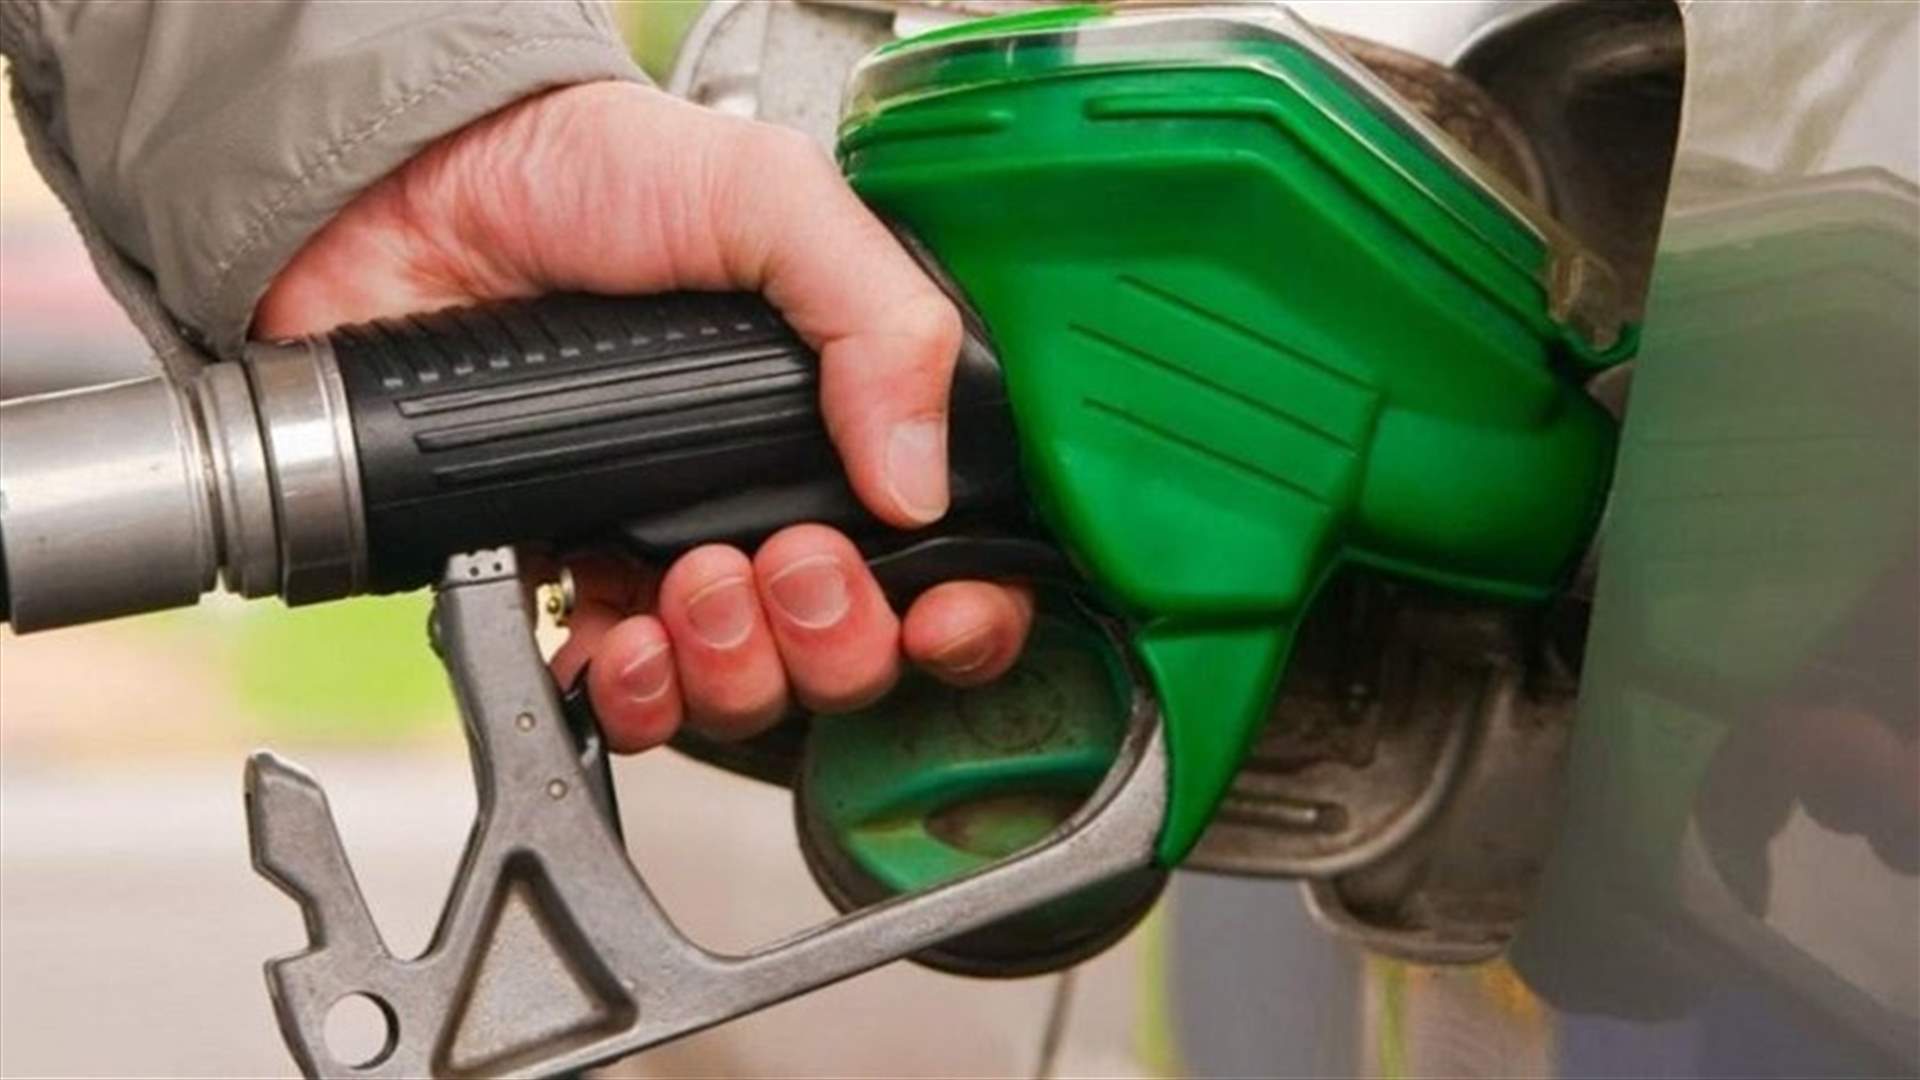 Lebanon’s gasoline price drops for second week